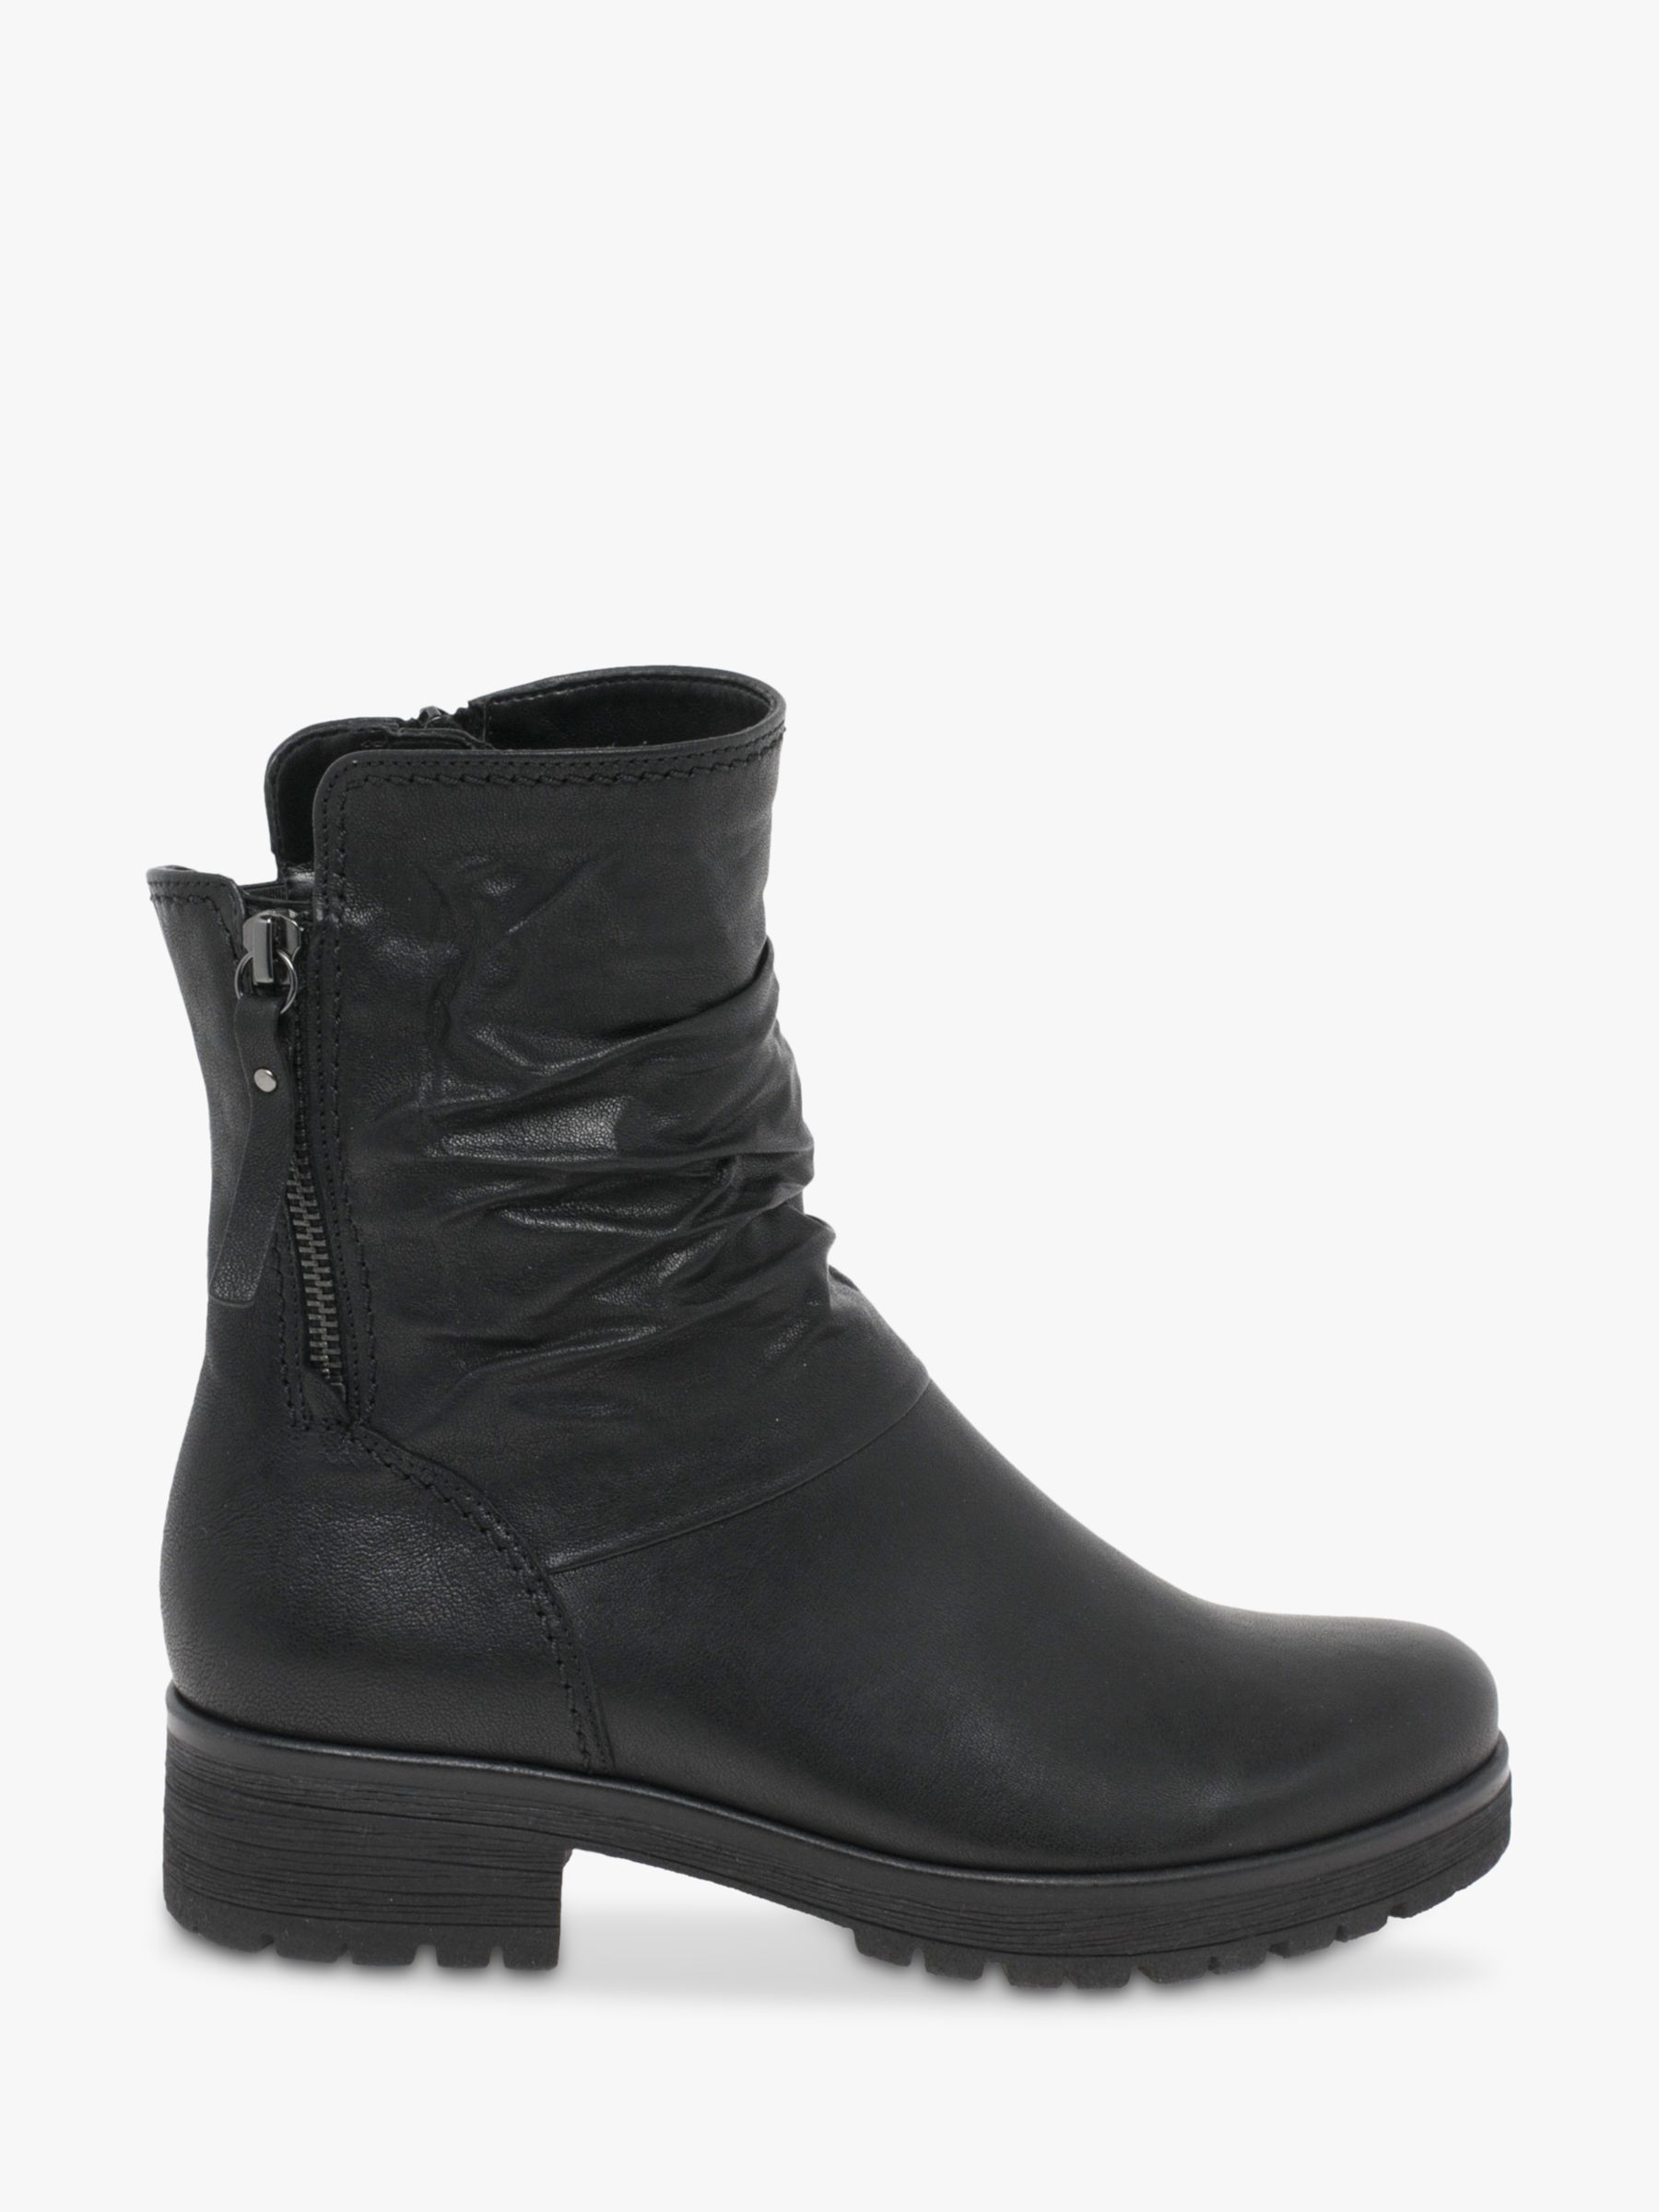 Gabor Zola Wide Fit Leather Biker Boots, Black at John Lewis &